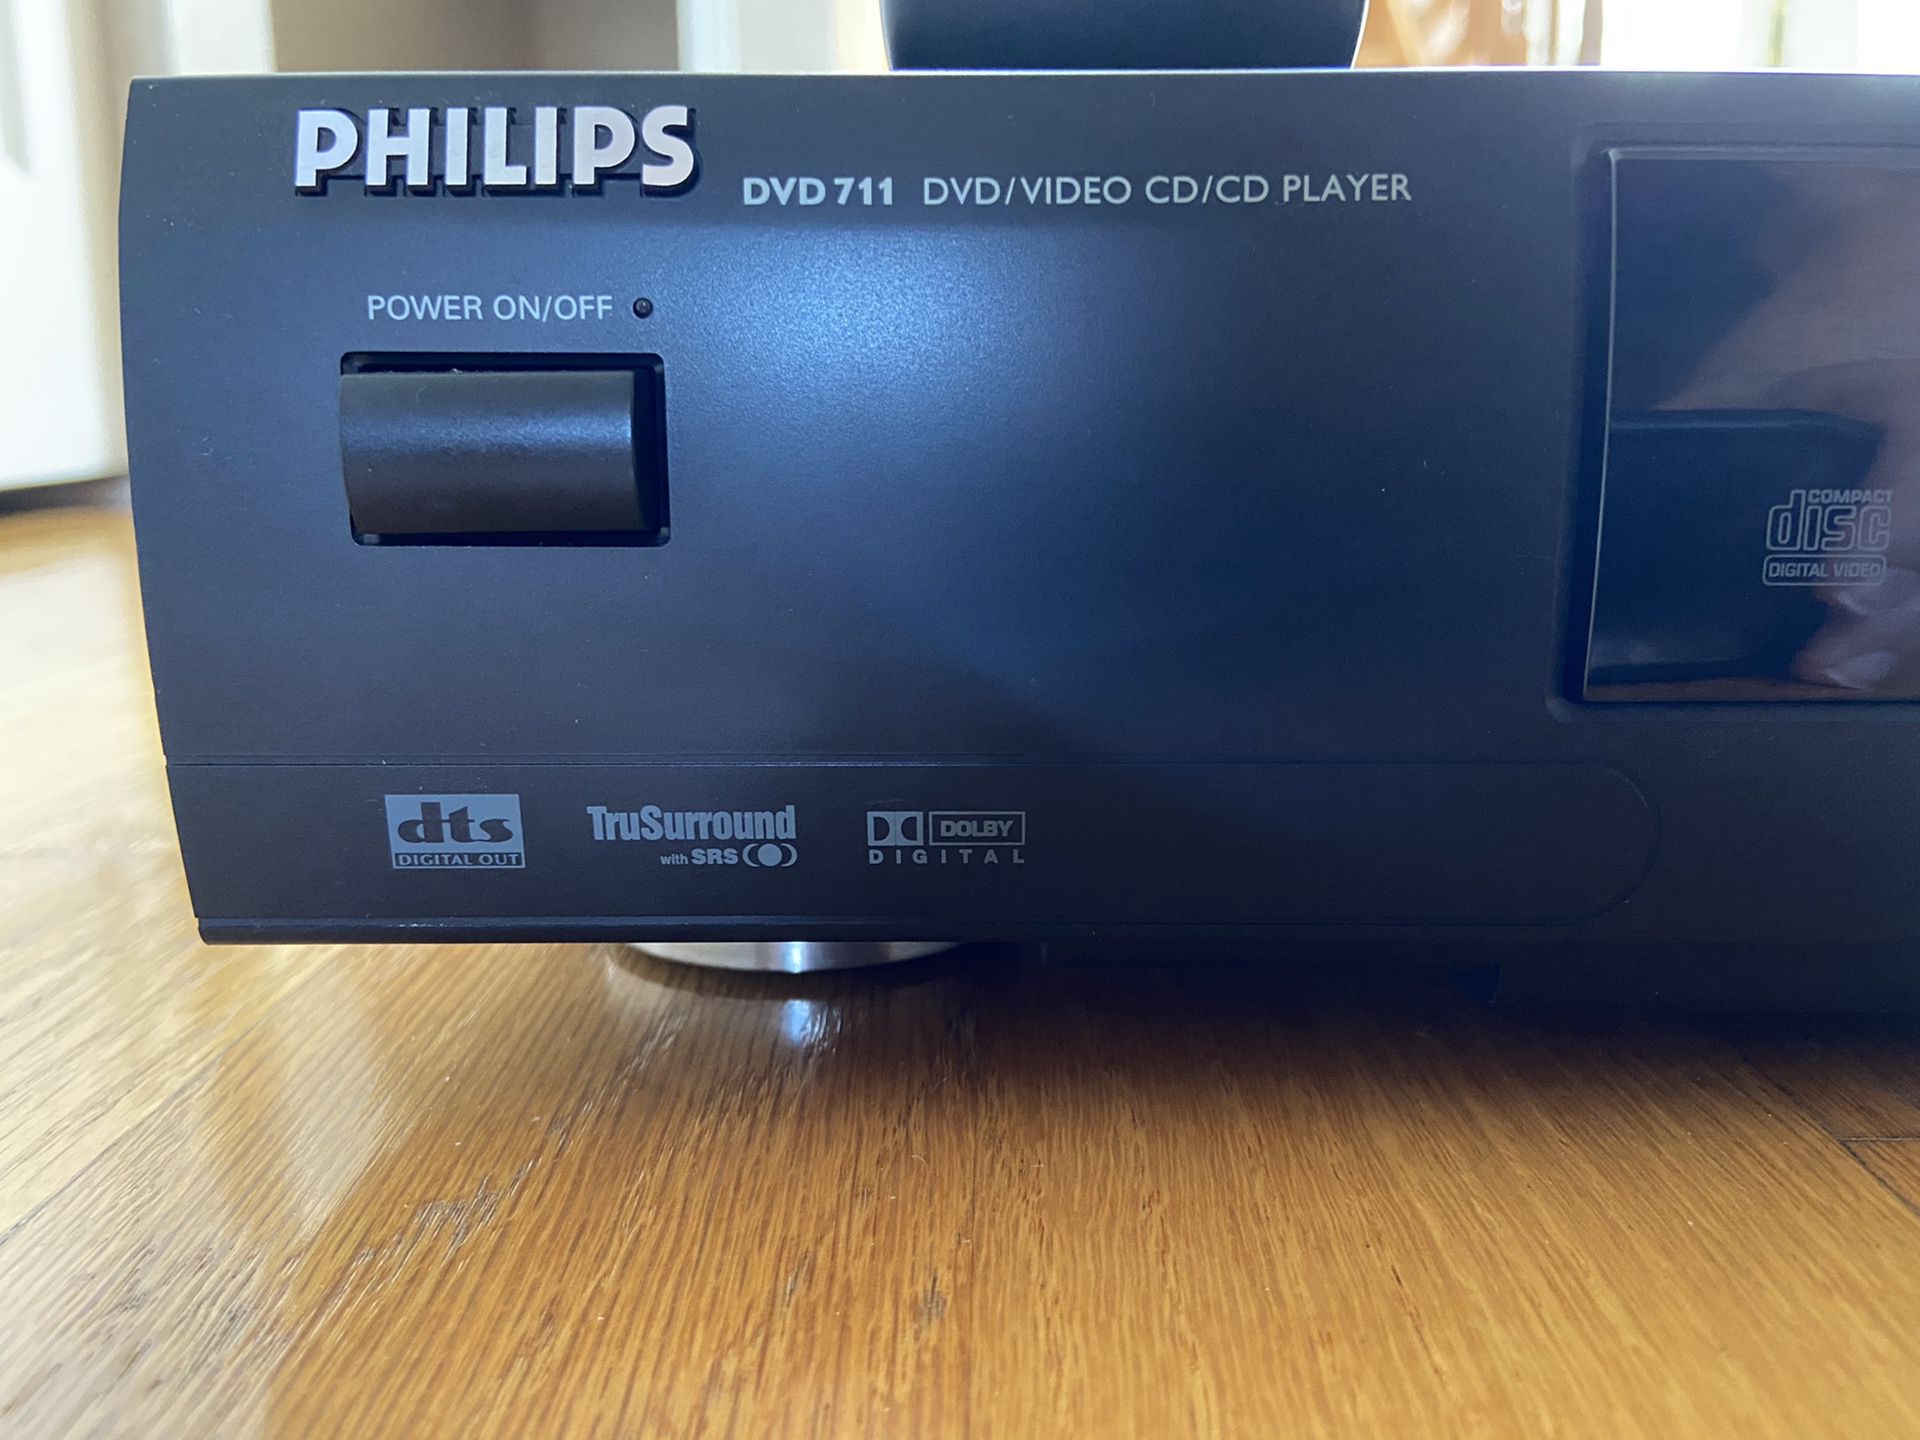 Philips DVD/Video CD/CD Player DVD 711 Model - Black with Remote